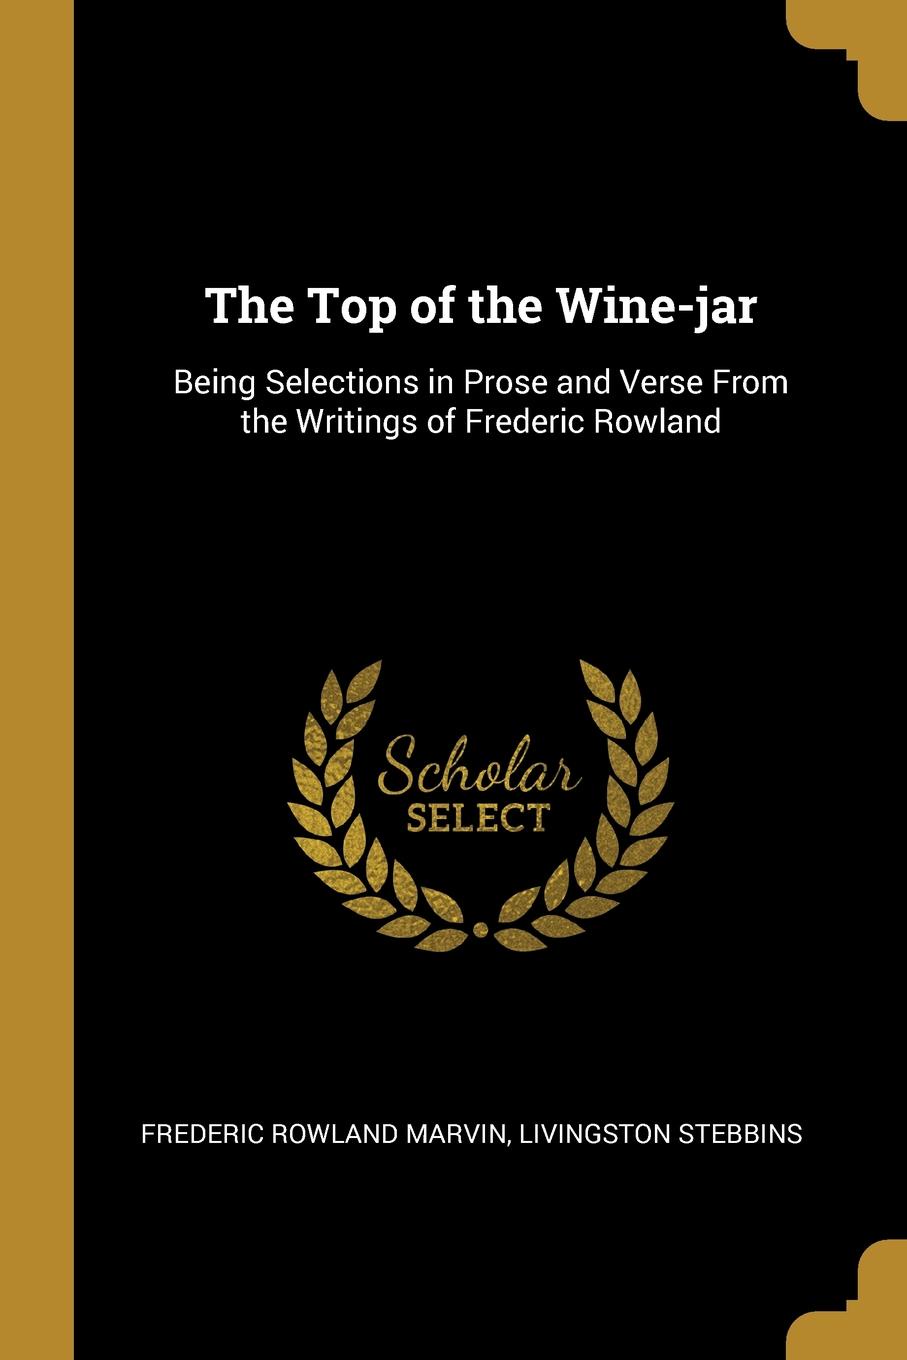 The Top of the Wine-jar. Being Selections in Prose and Verse From the Writings of Frederic Rowland